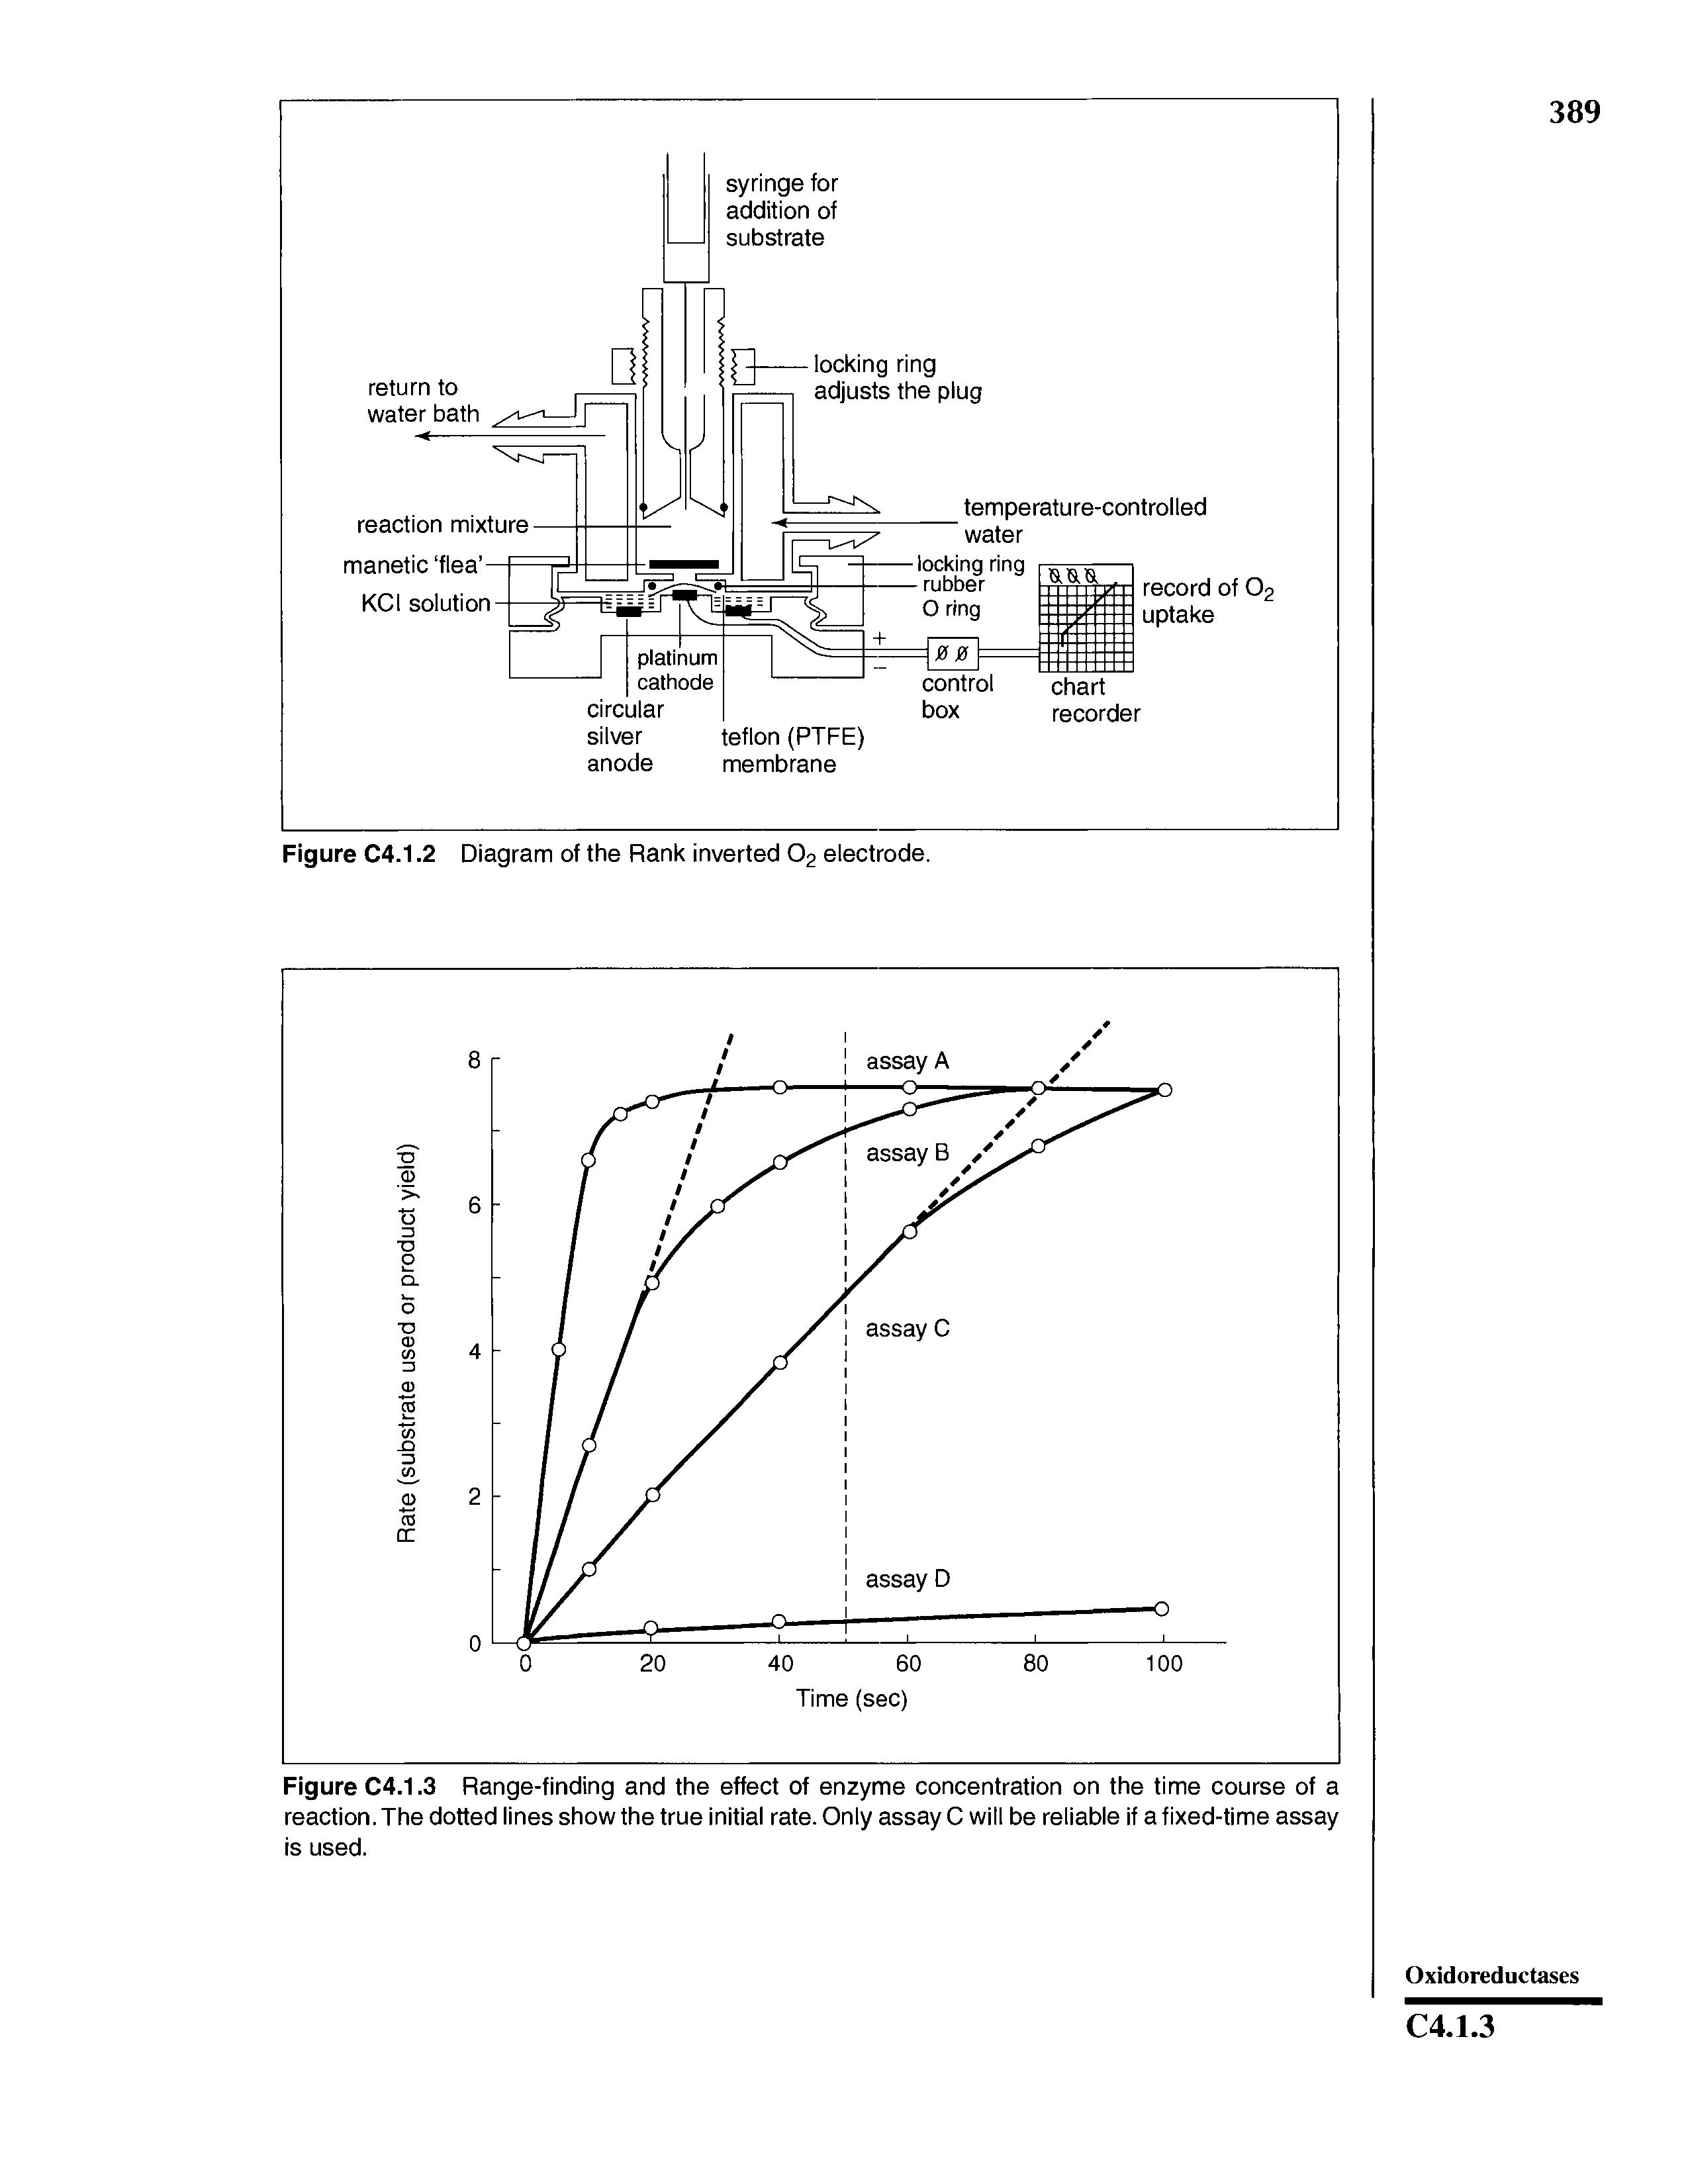 Figure C4.1.3 Range-finding and the effect of enzyme concentration on the time course of a reaction. The dotted lines show the true initial rate. Only assay C will be reliable if a fixed-time assay is used.